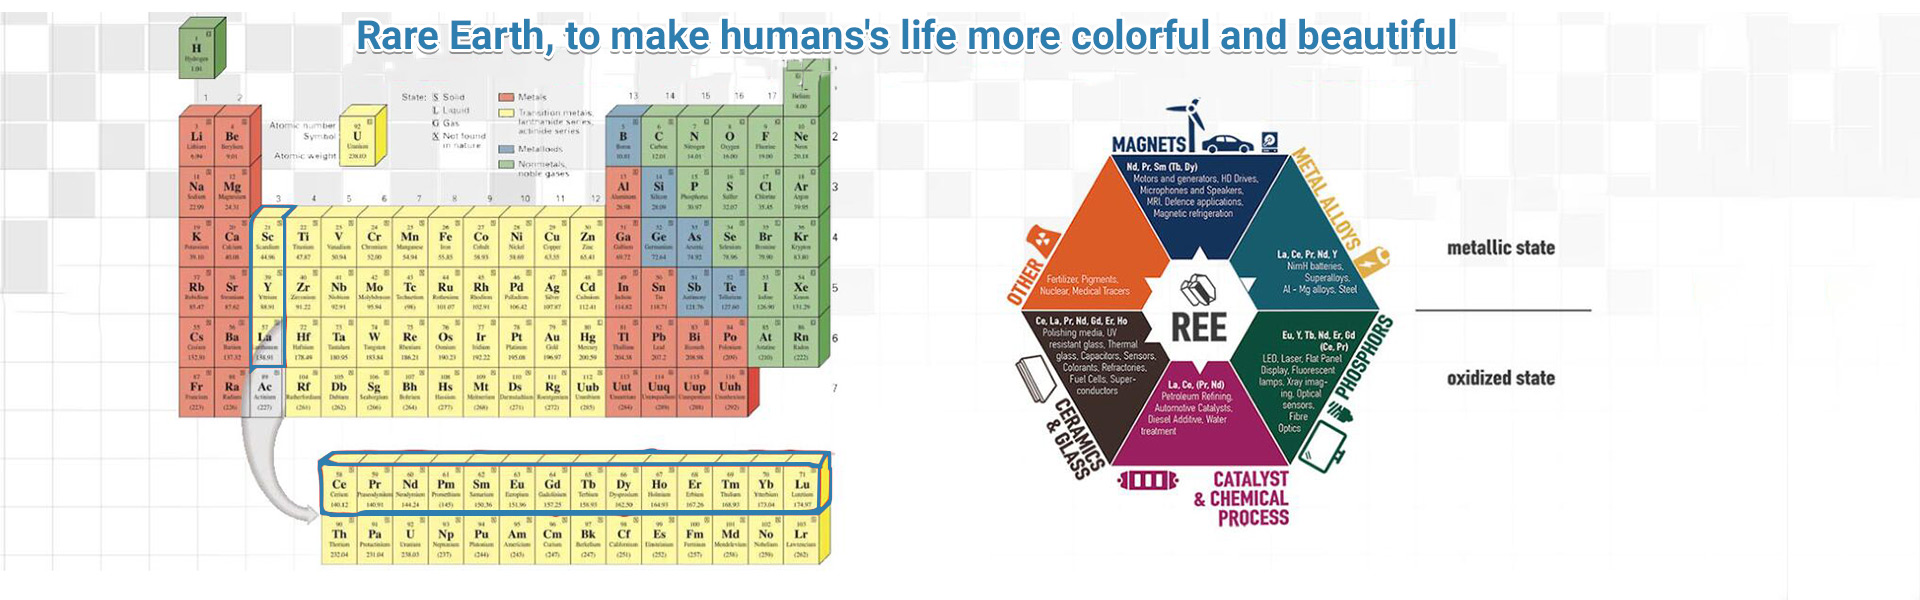 Rare Earth   to make humans life more colorful and beautiful